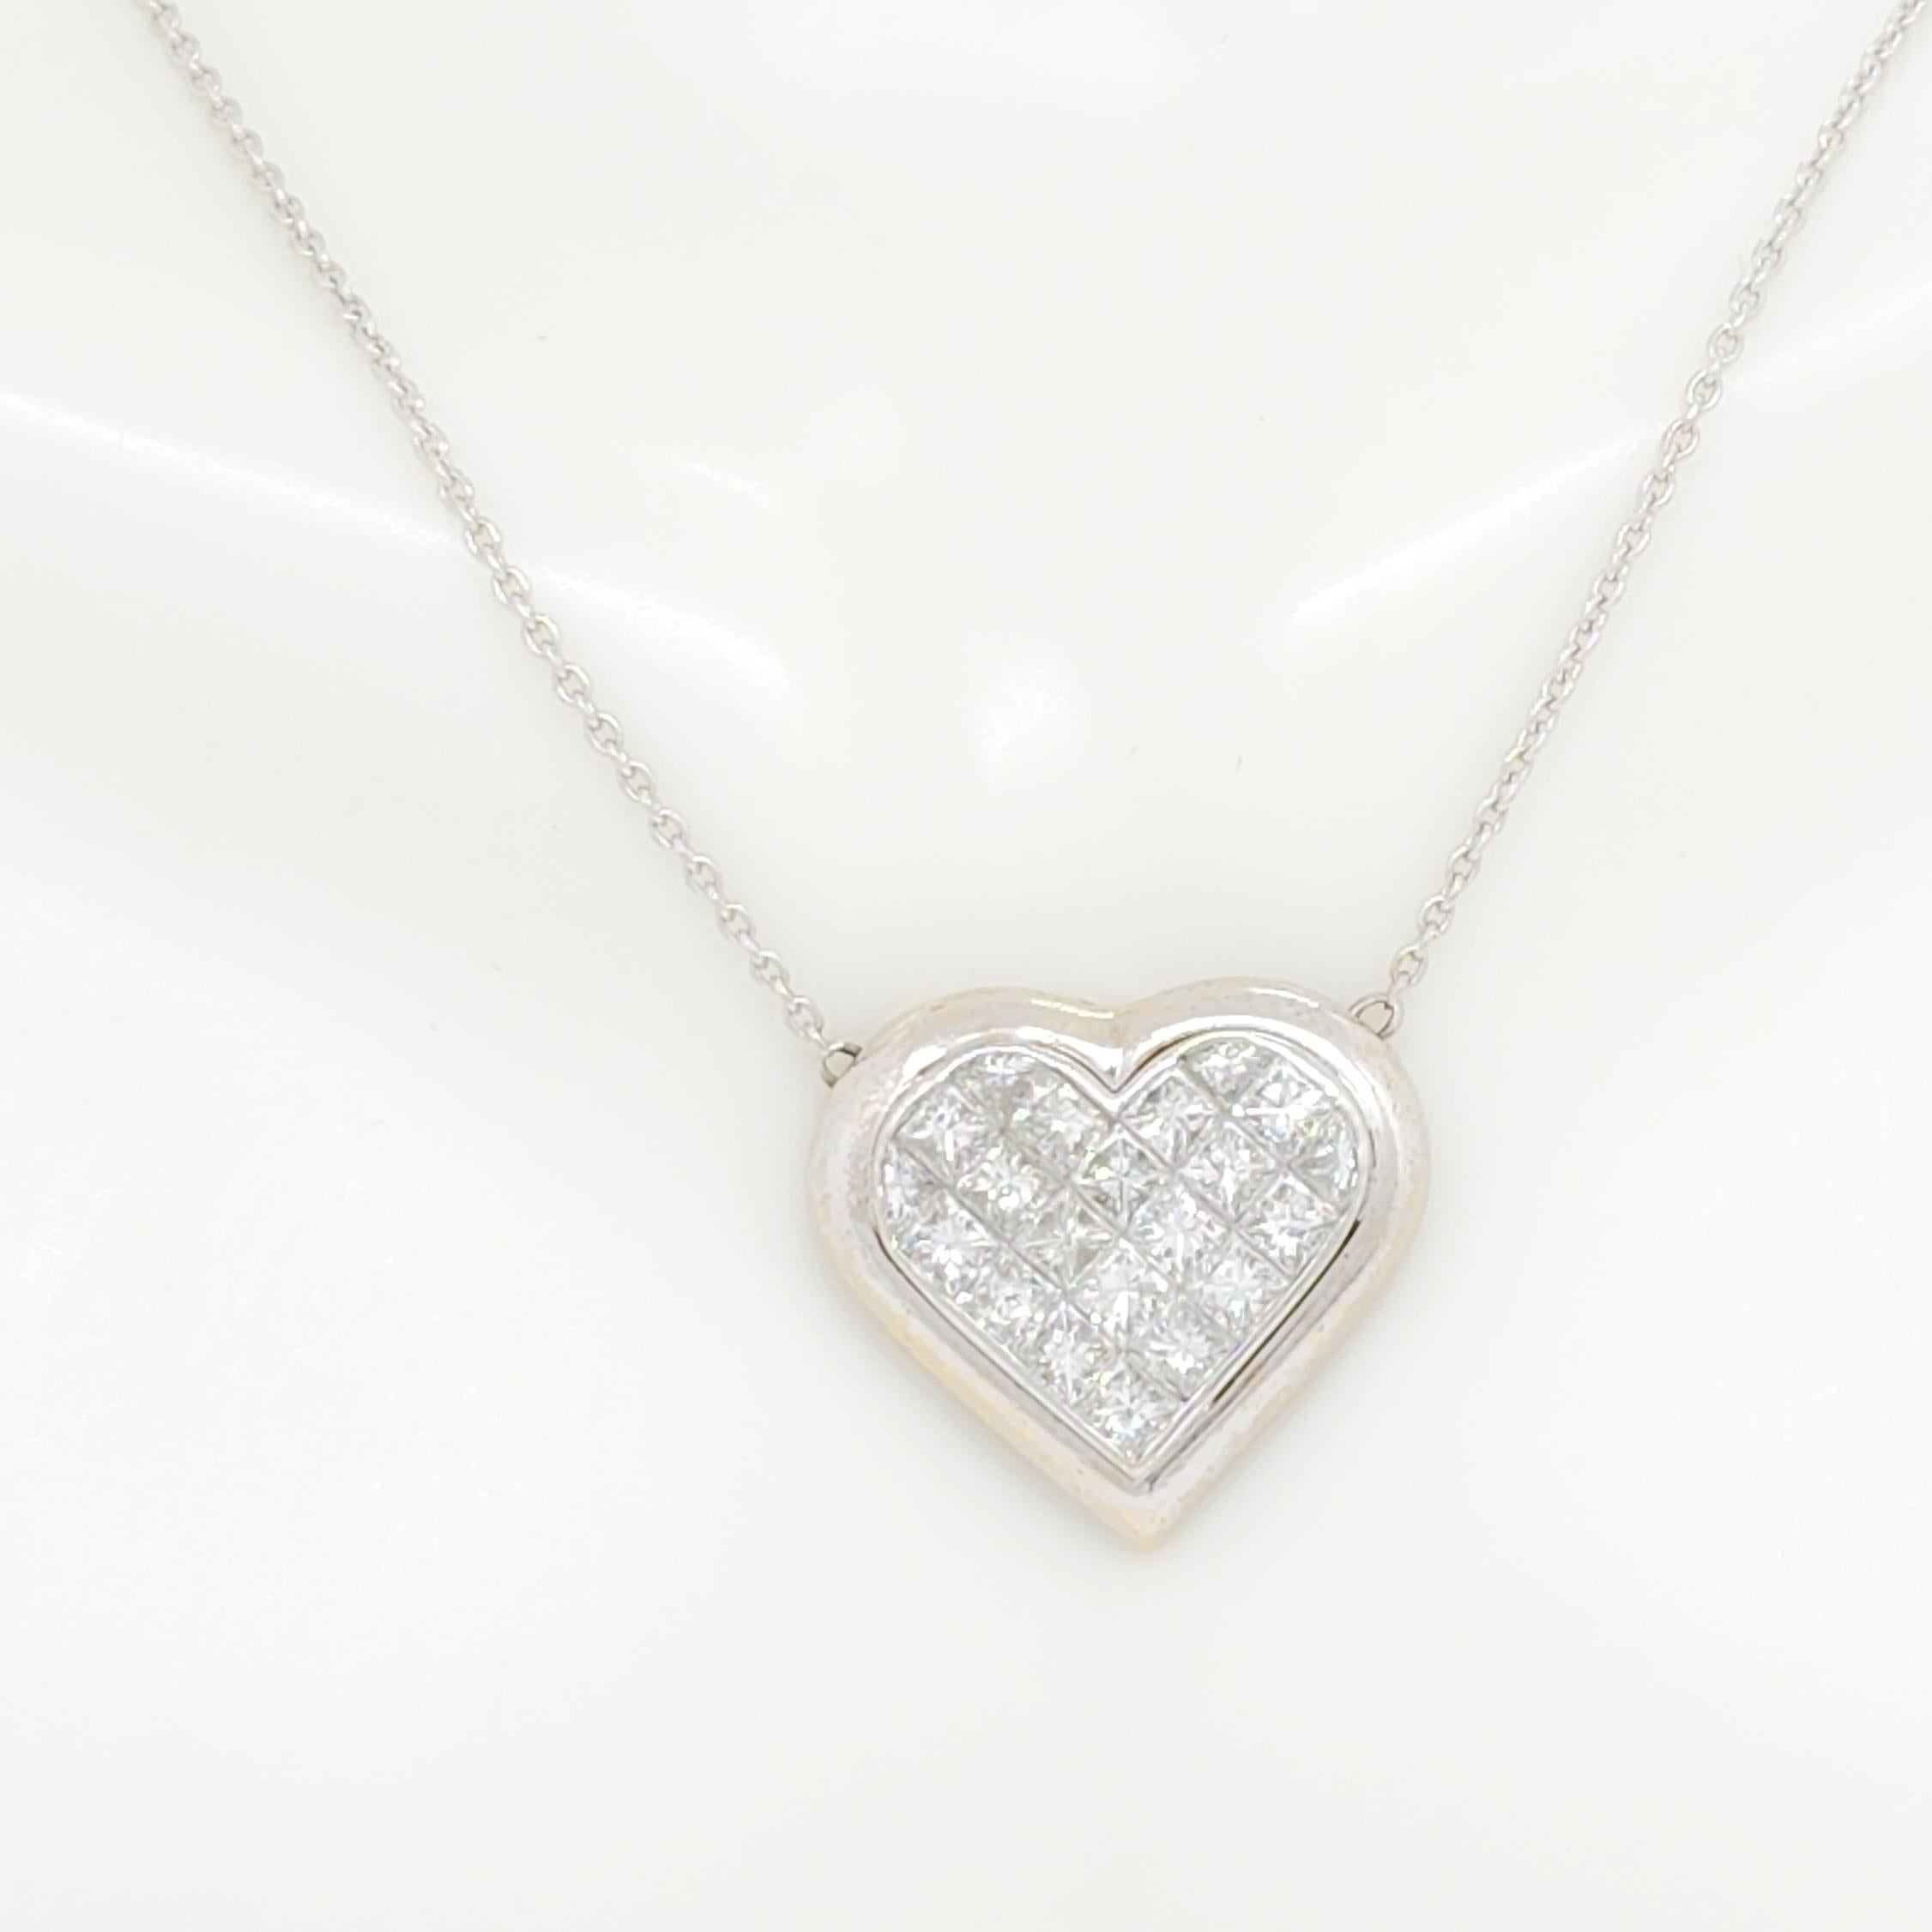 White Diamond Princess Cut Heart Pendant Necklace in 18k In New Condition For Sale In Los Angeles, CA